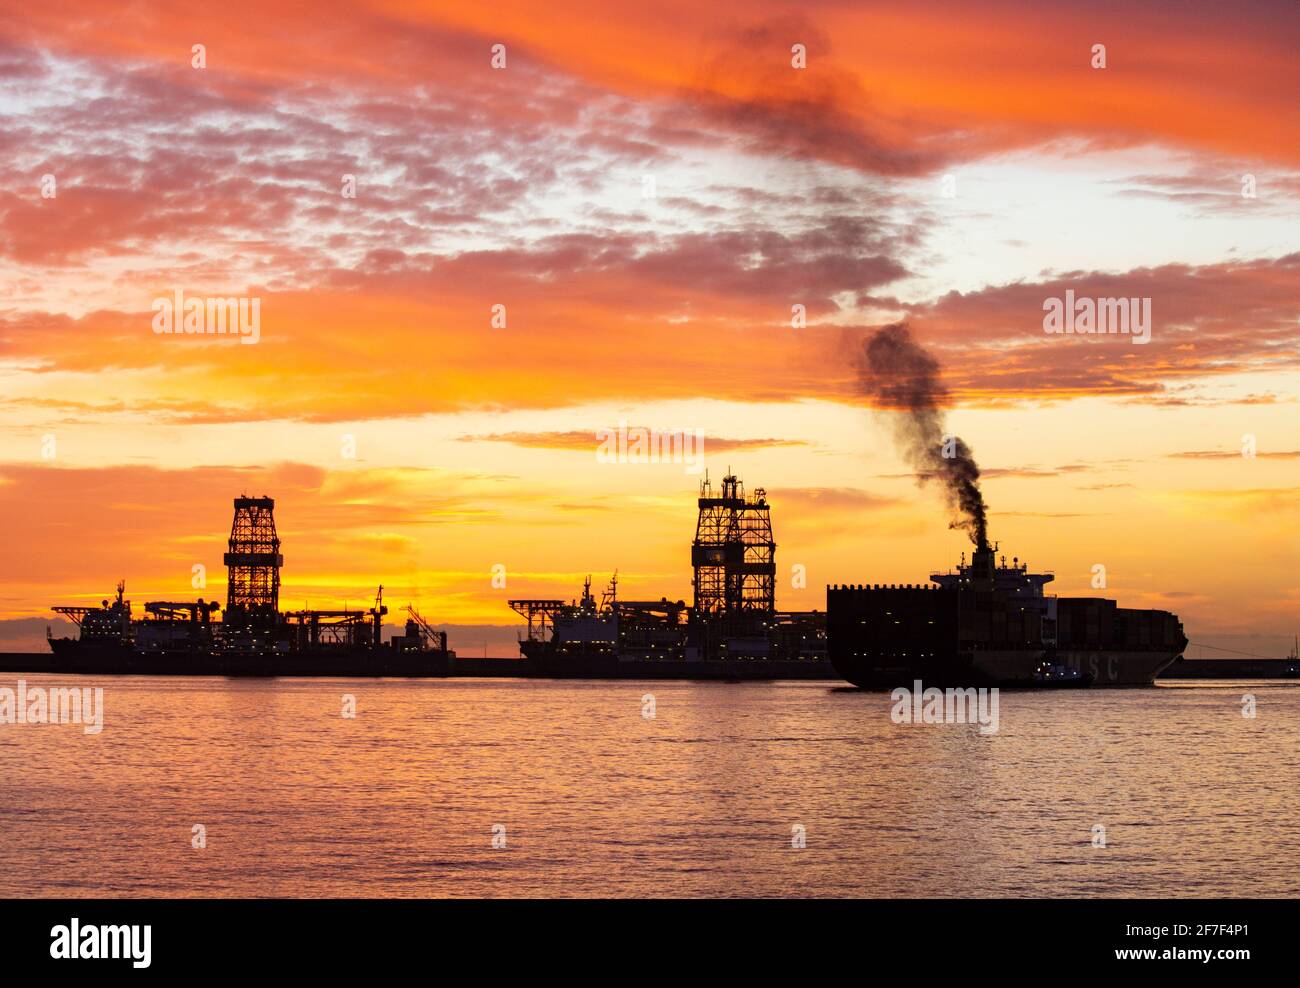 Las Palmas, Gran Canaria, Canary Islands, Spain. 7th April, 2021. A container ship belches out black smoke as the sky explodes with colour as the sun rises behind drilling ships in Las Palmas port on Gran Canaria. There are around ten drilling ships and oil rigs in the port which have been idle/mothballed for more than a year. Credit: Alan Dawson/Alamy Live News. Stock Photo